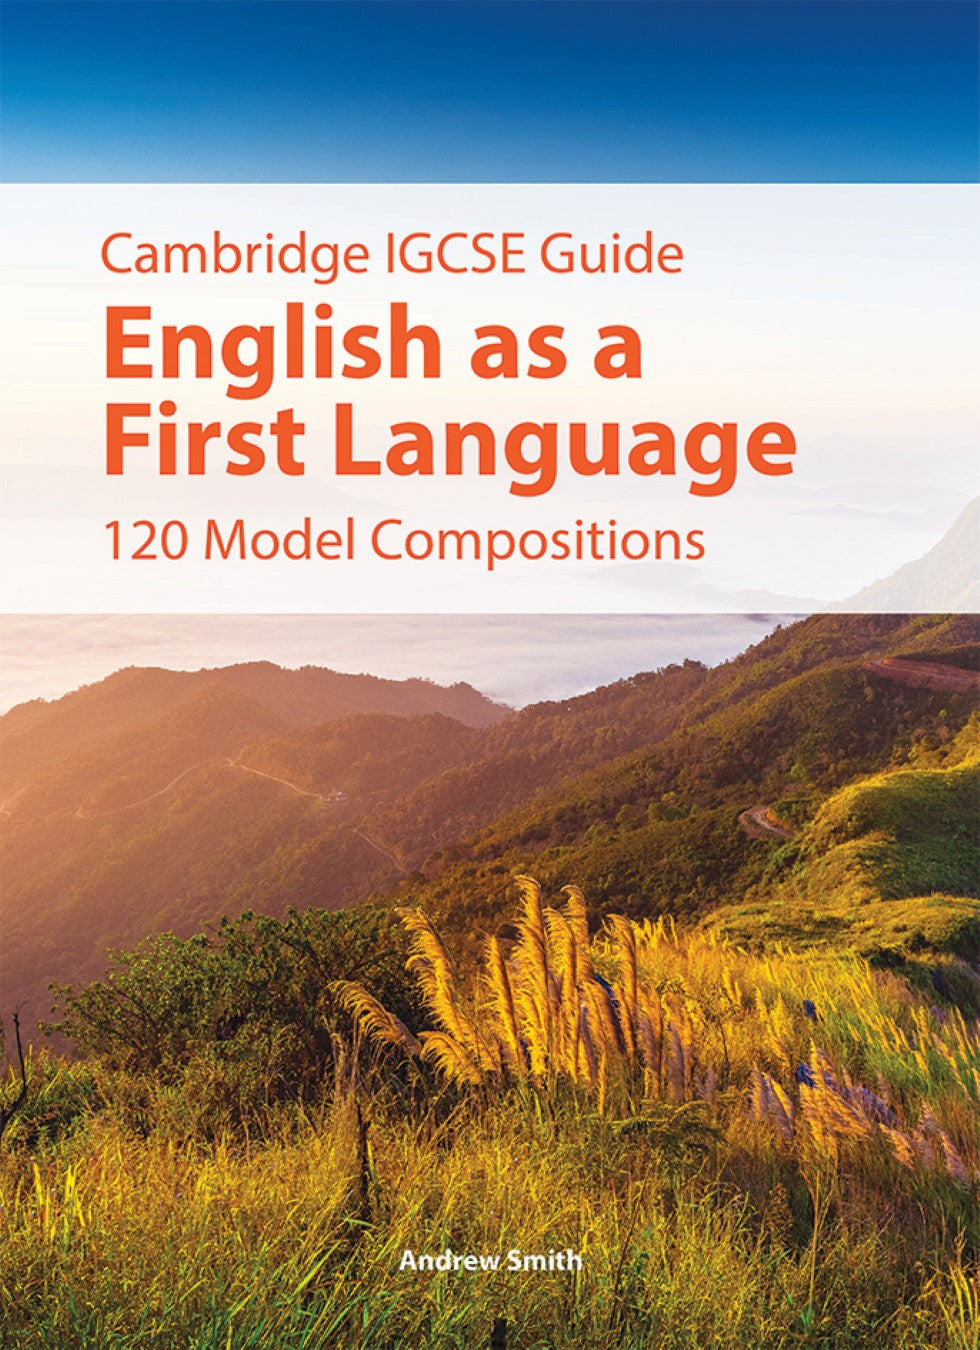 IGCSE Guide English as a First Language  120 Model Compositions